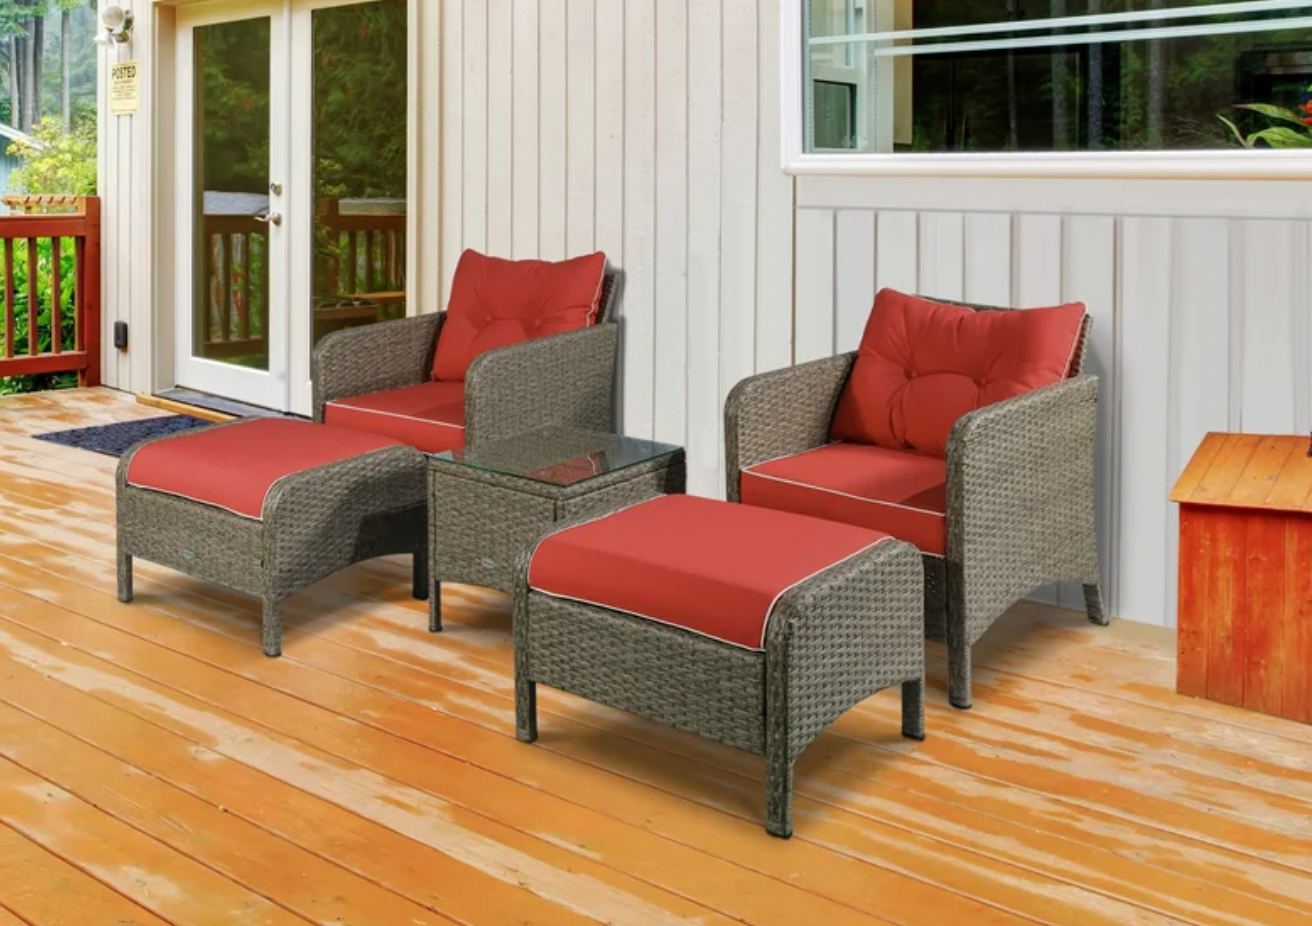 Takavor Wicker/Rattan 2 - Person Seating Group with Cushions